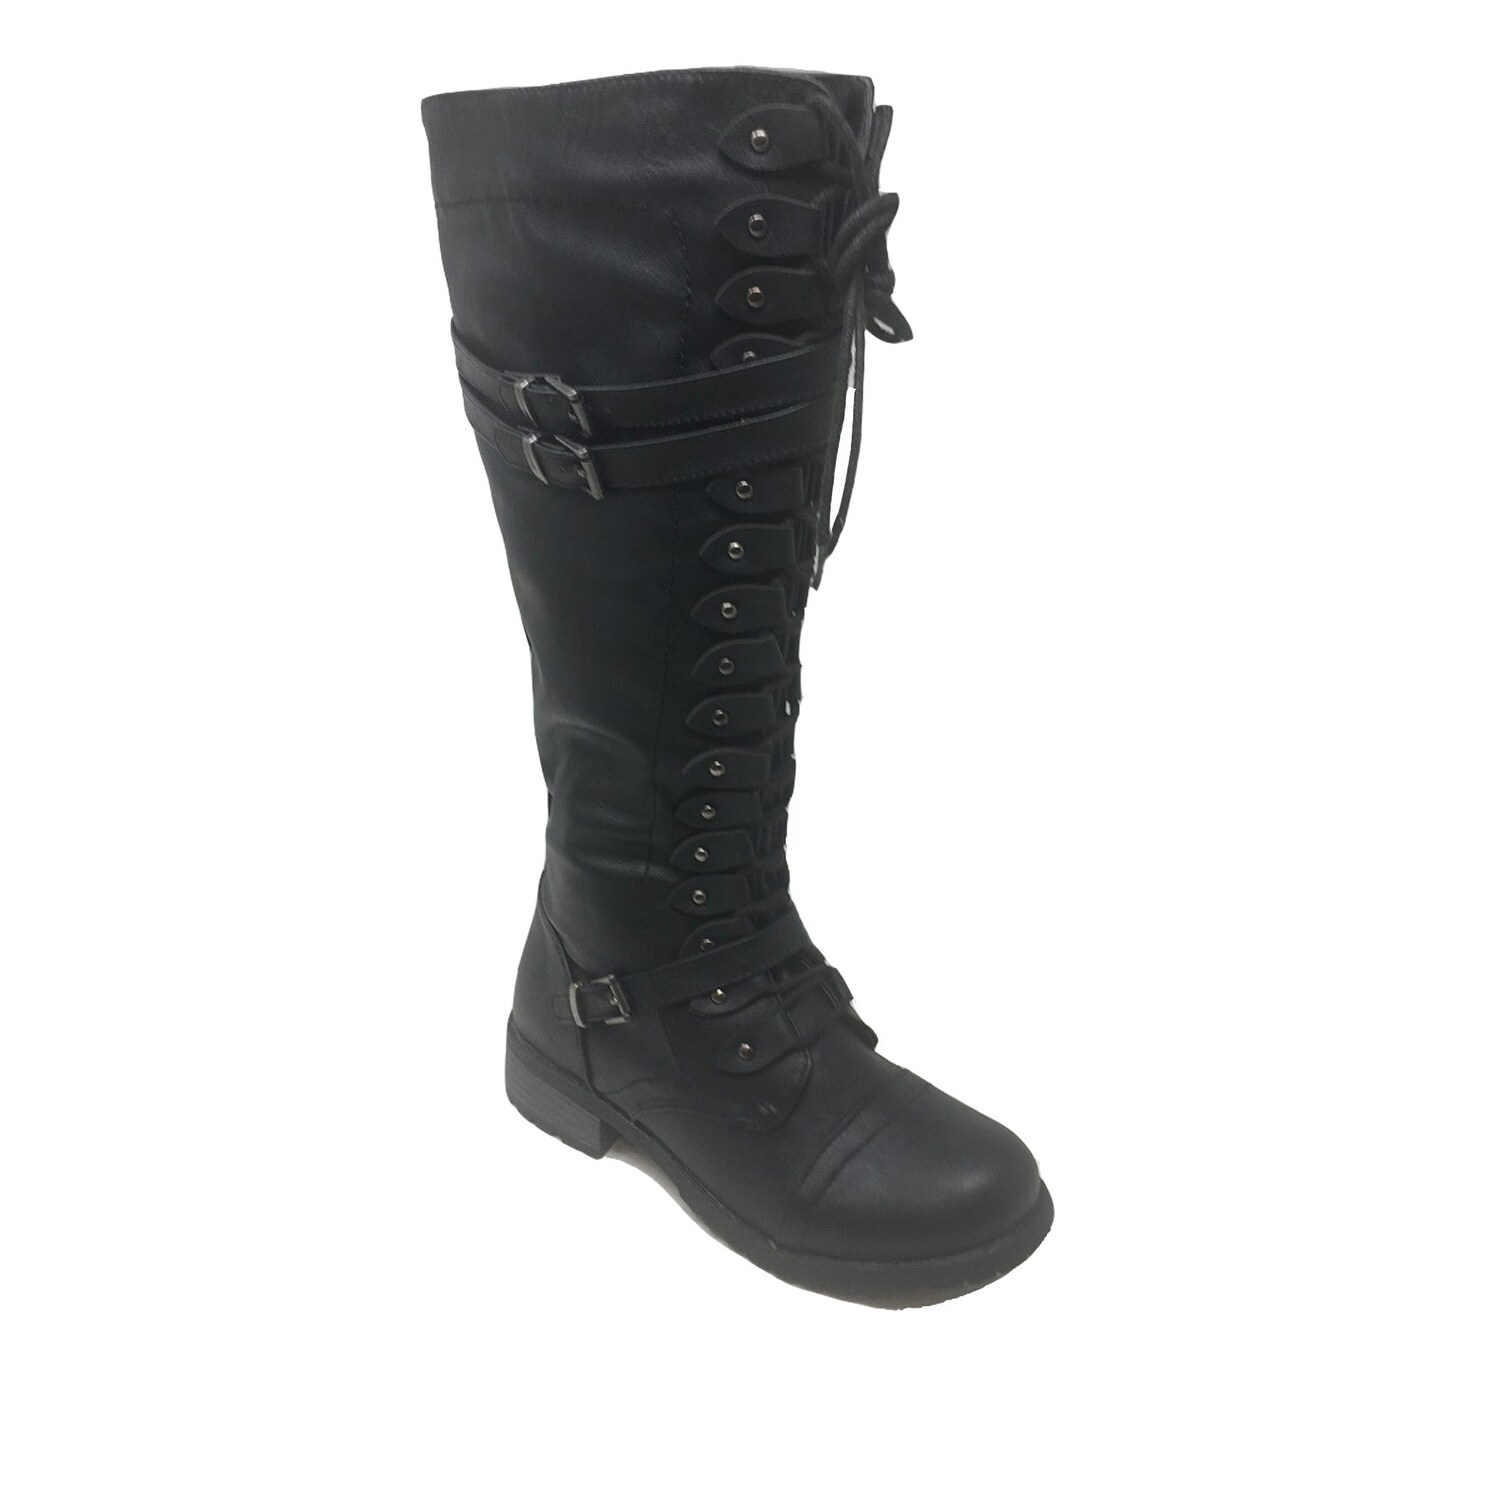 women's lace up knee high combat boots